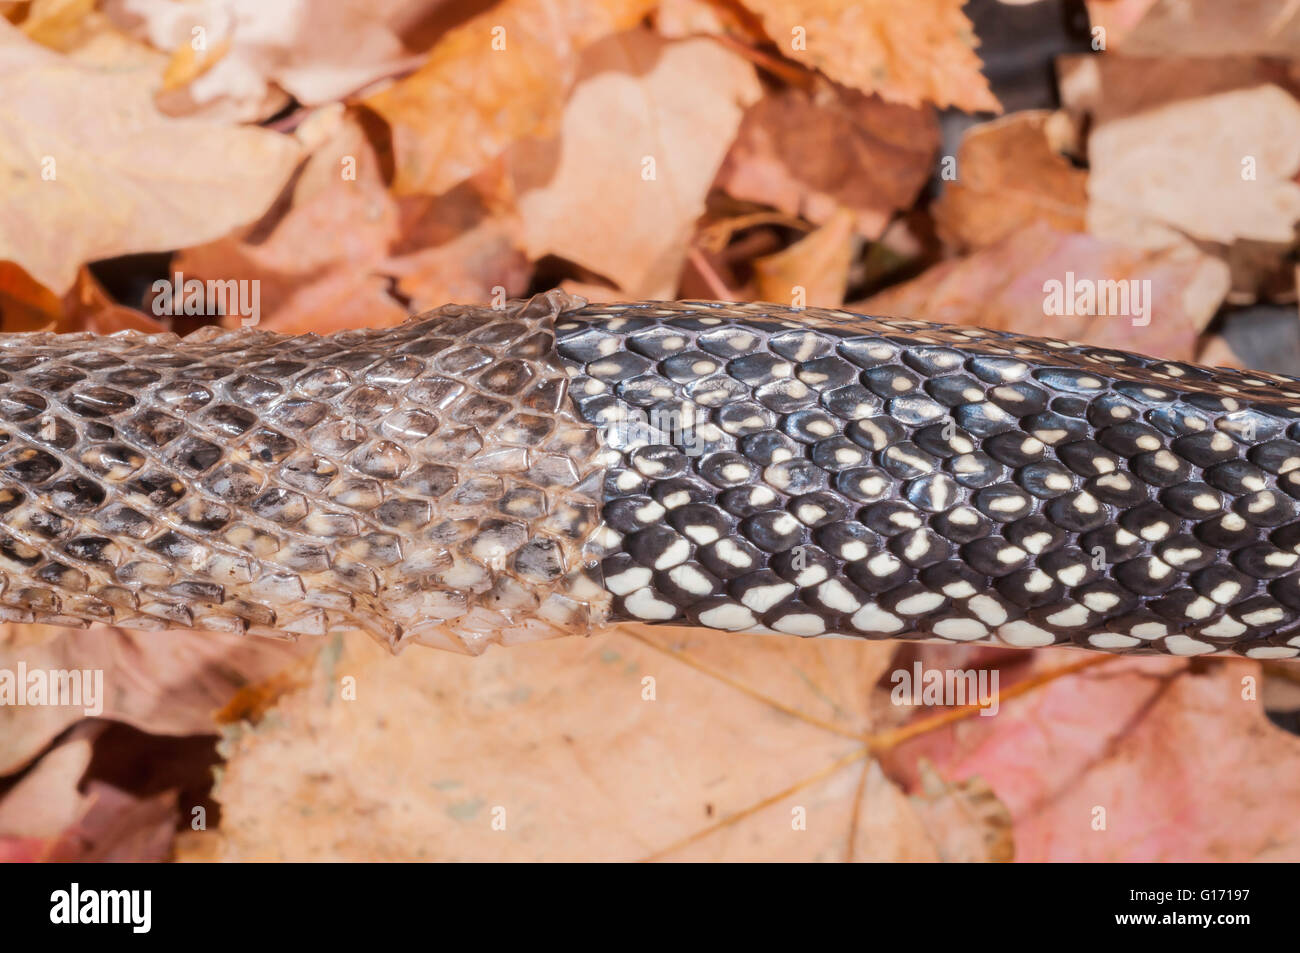 Speckled kingsnake, Lampropeltis getula holbrooki, native to southern and central USA Stock Photo